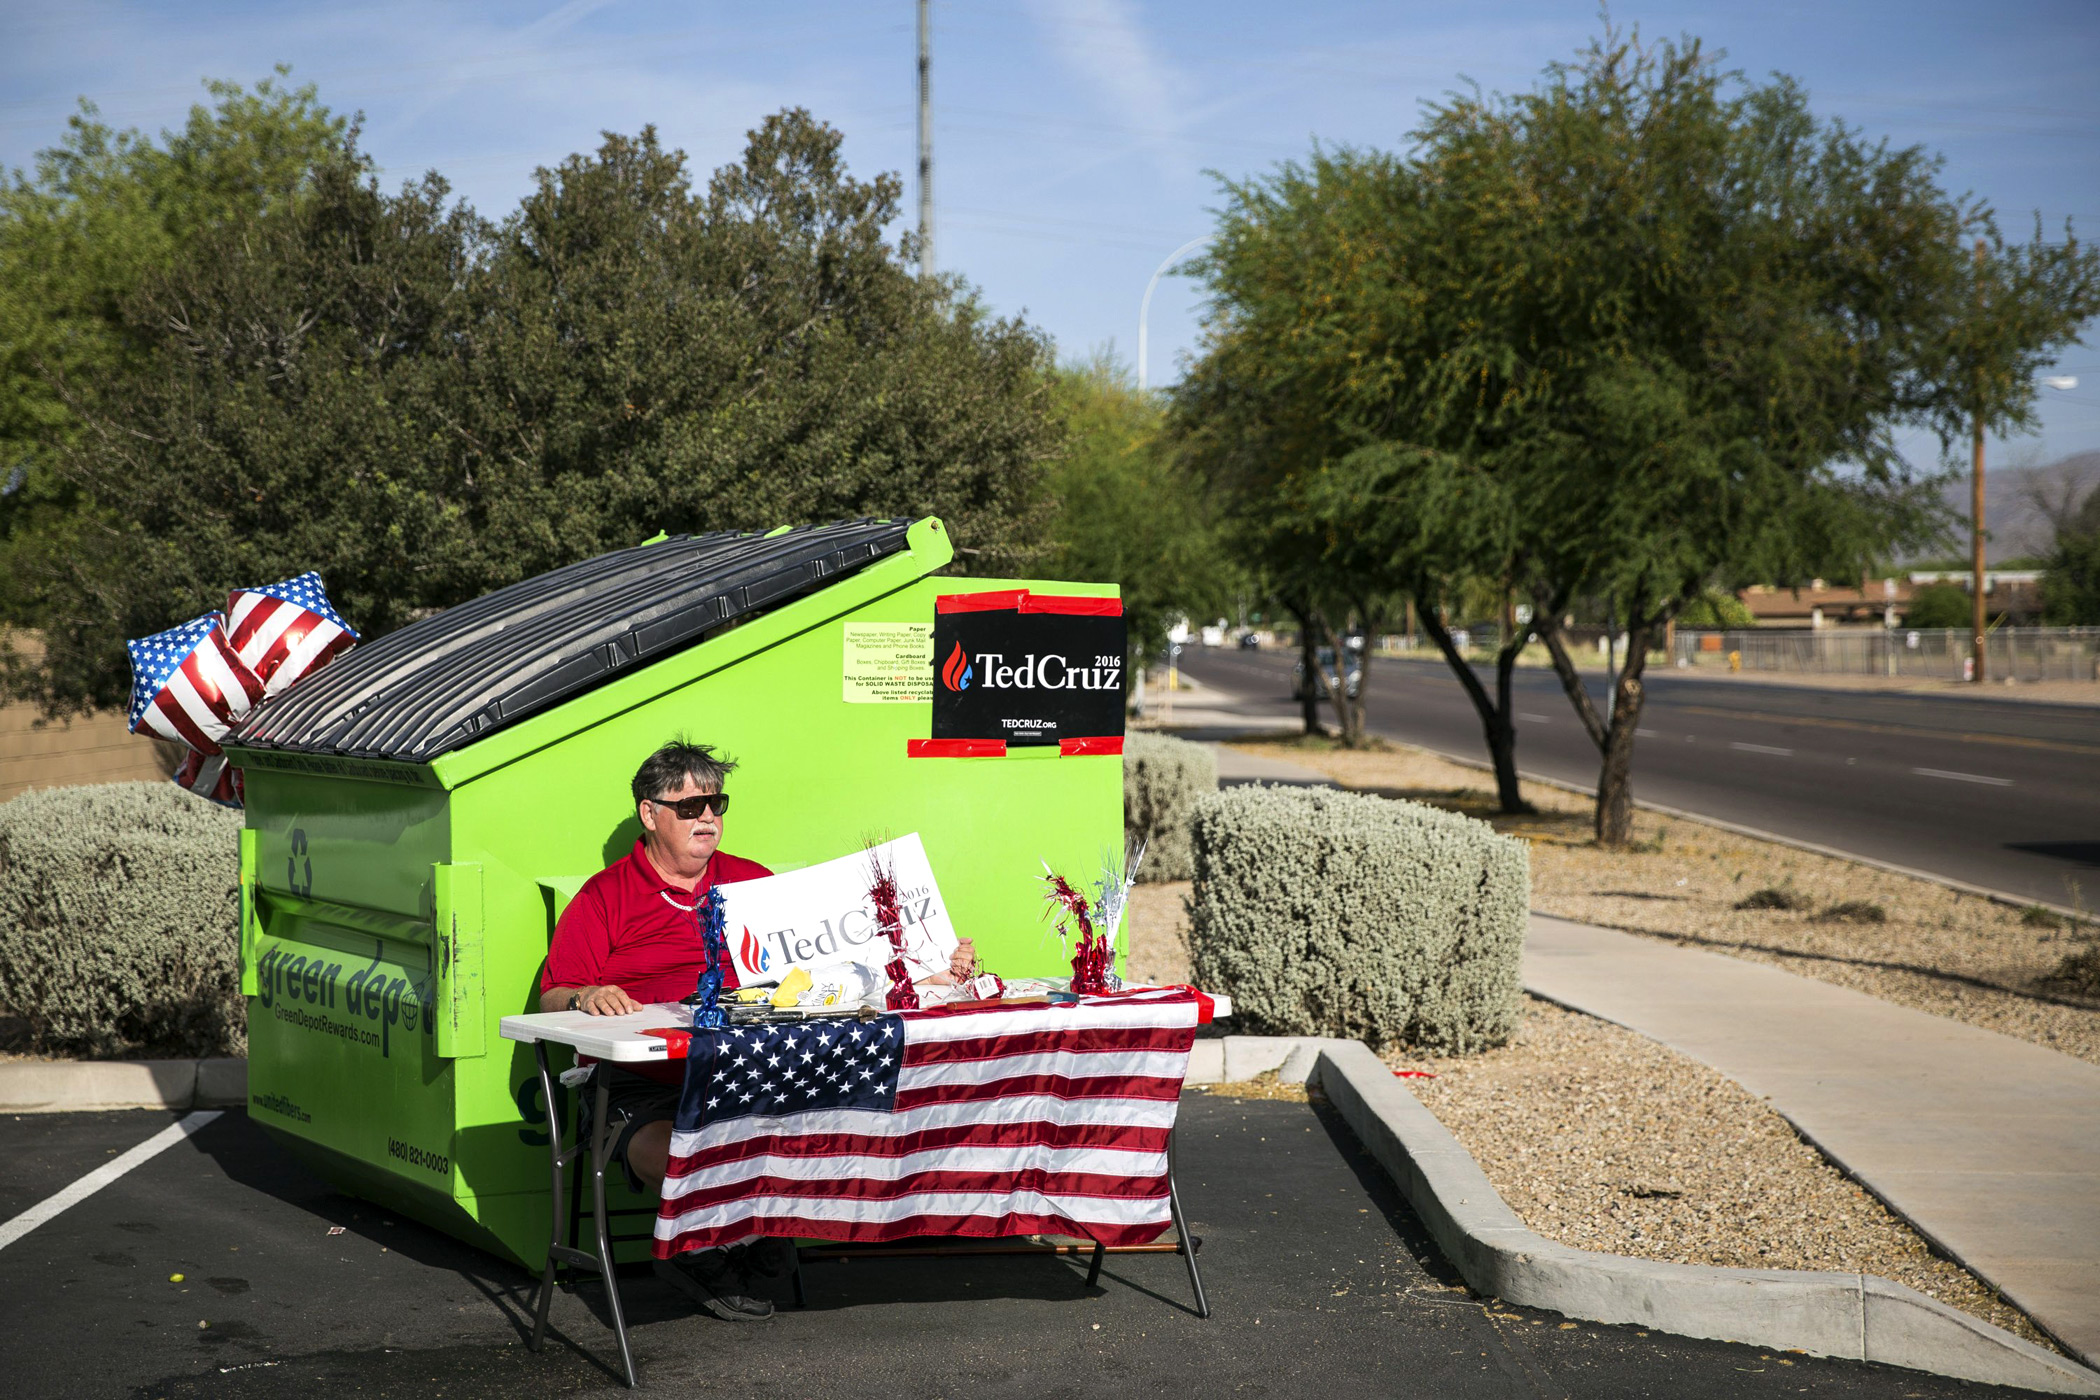 Phillip Ramsdell, a supporter of Texas Sen. Ted Cruz, campaigns near a polling place in the Laveen Village neighborhood of Phoenix on March 22.